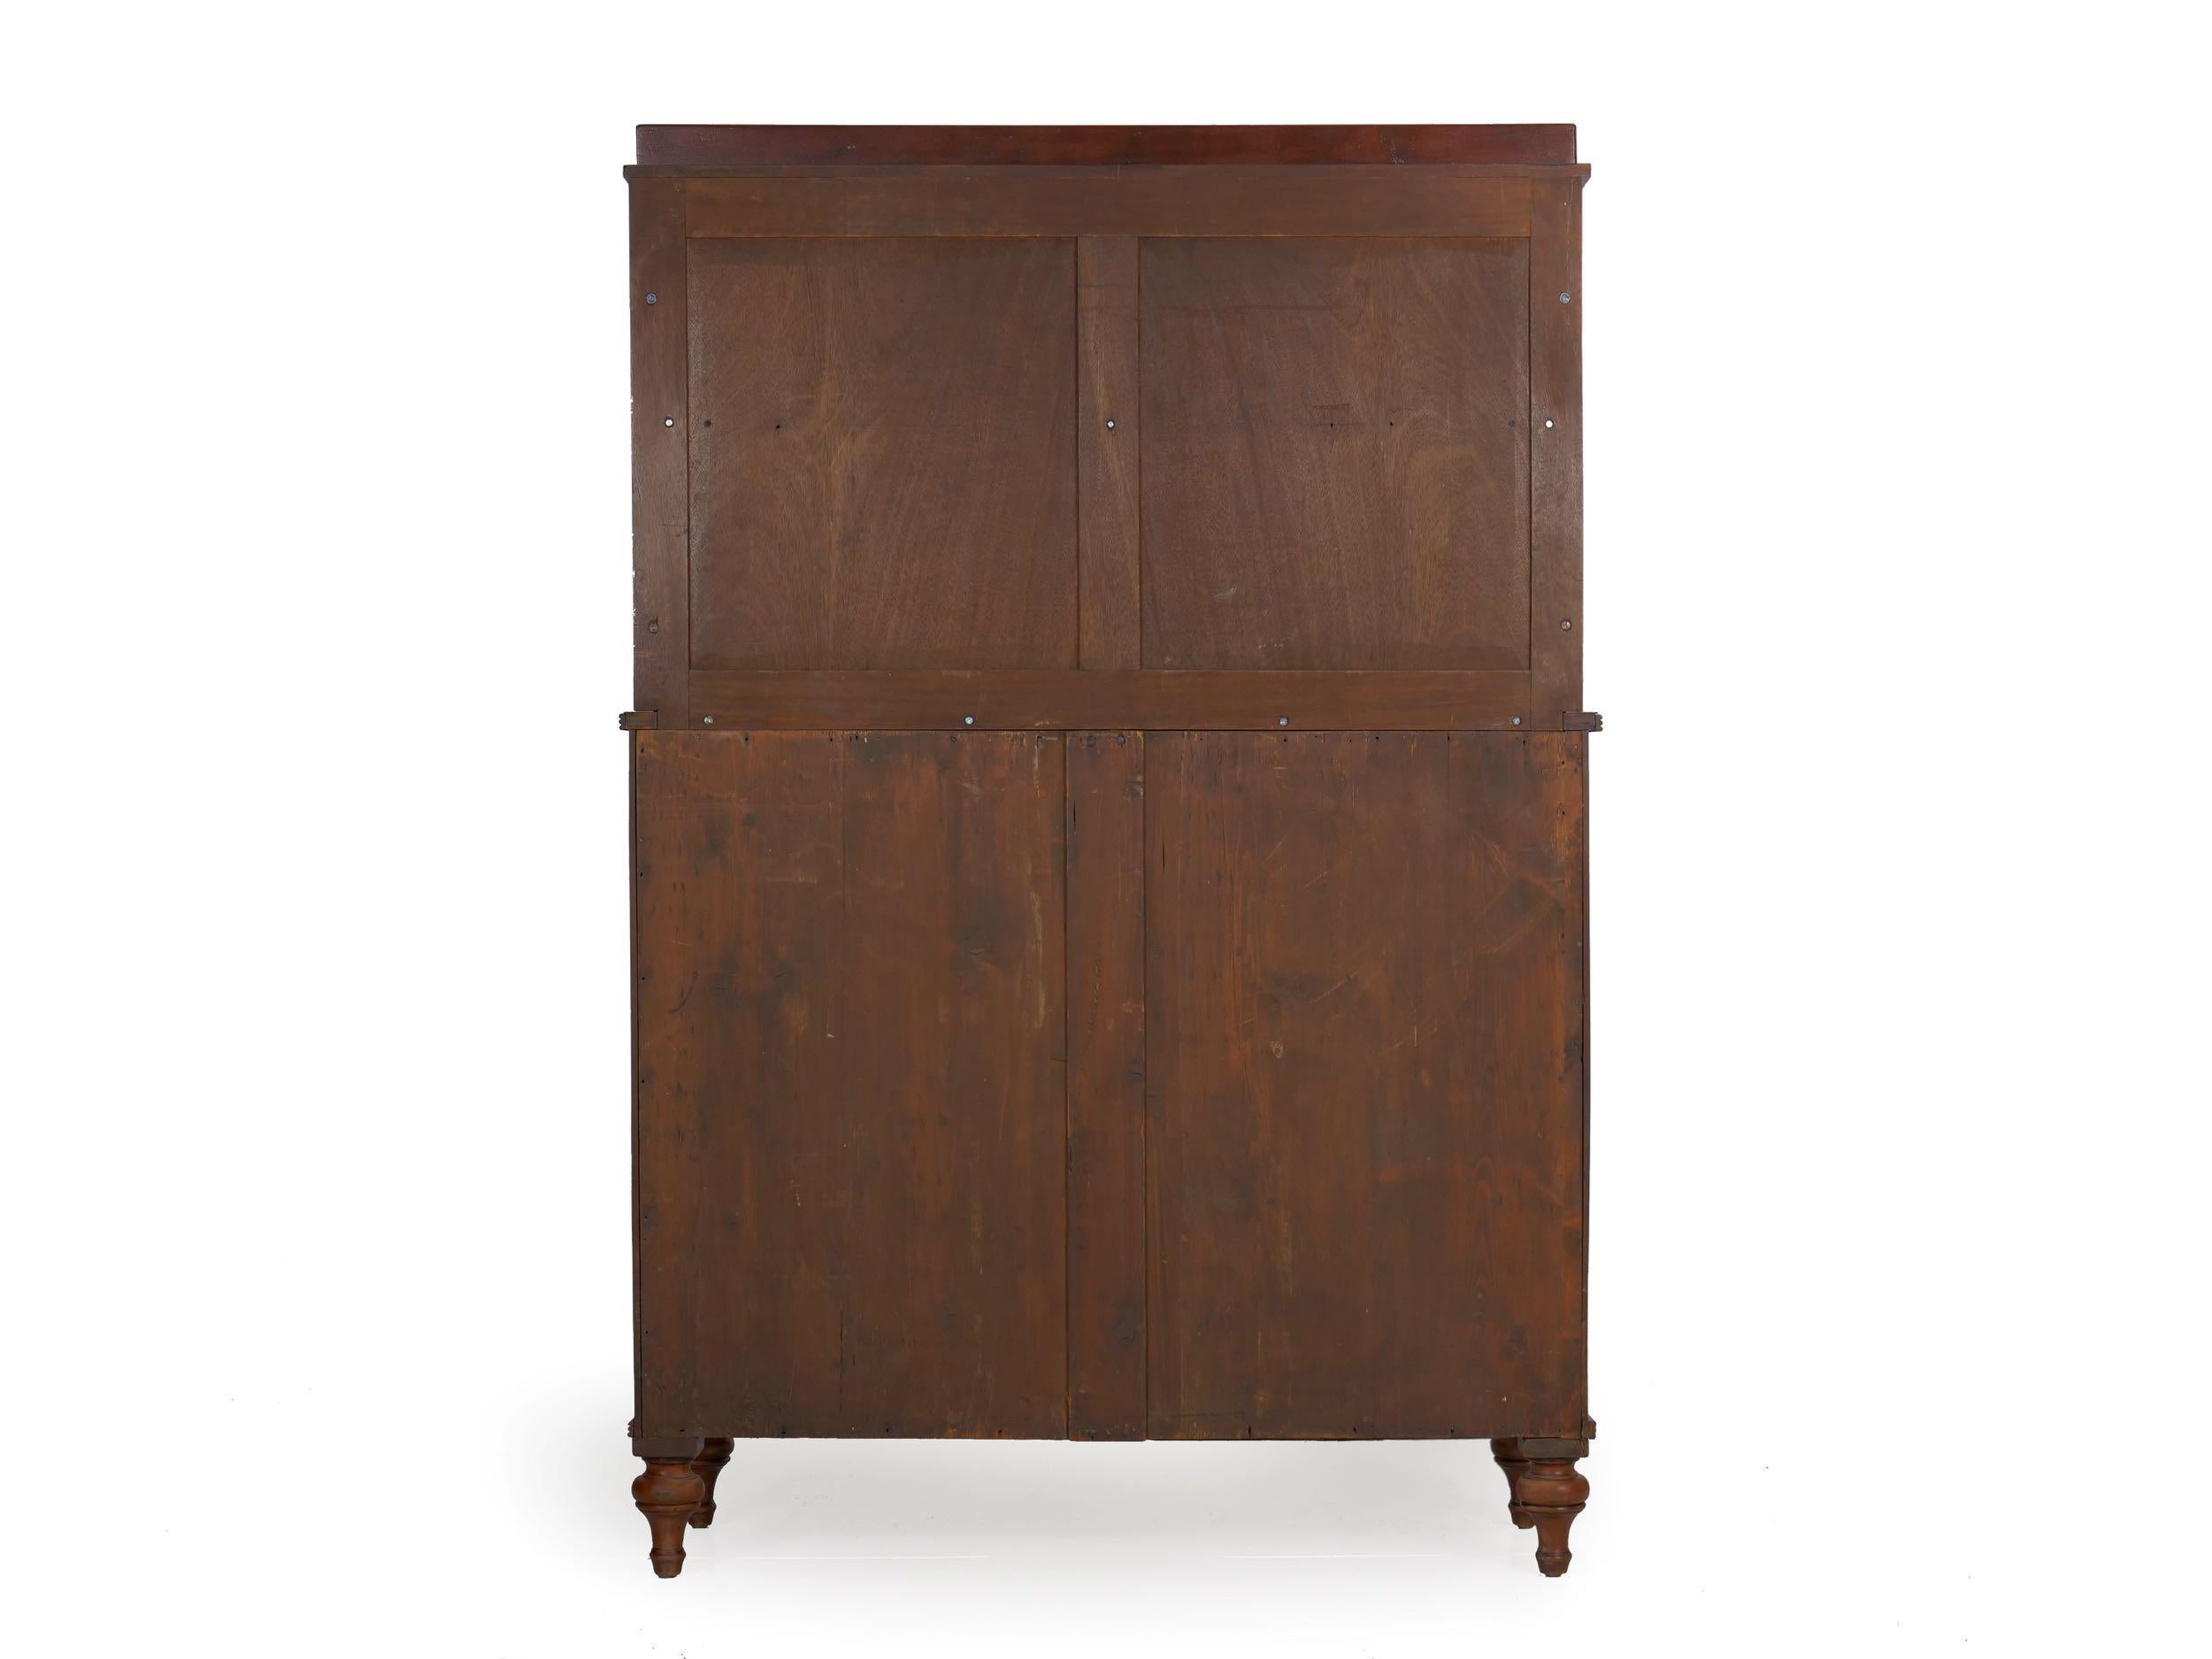 19th Century English Regency Antique Mahogany Chiffonier Cabinet with Bookshelf In Good Condition For Sale In Shippensburg, PA